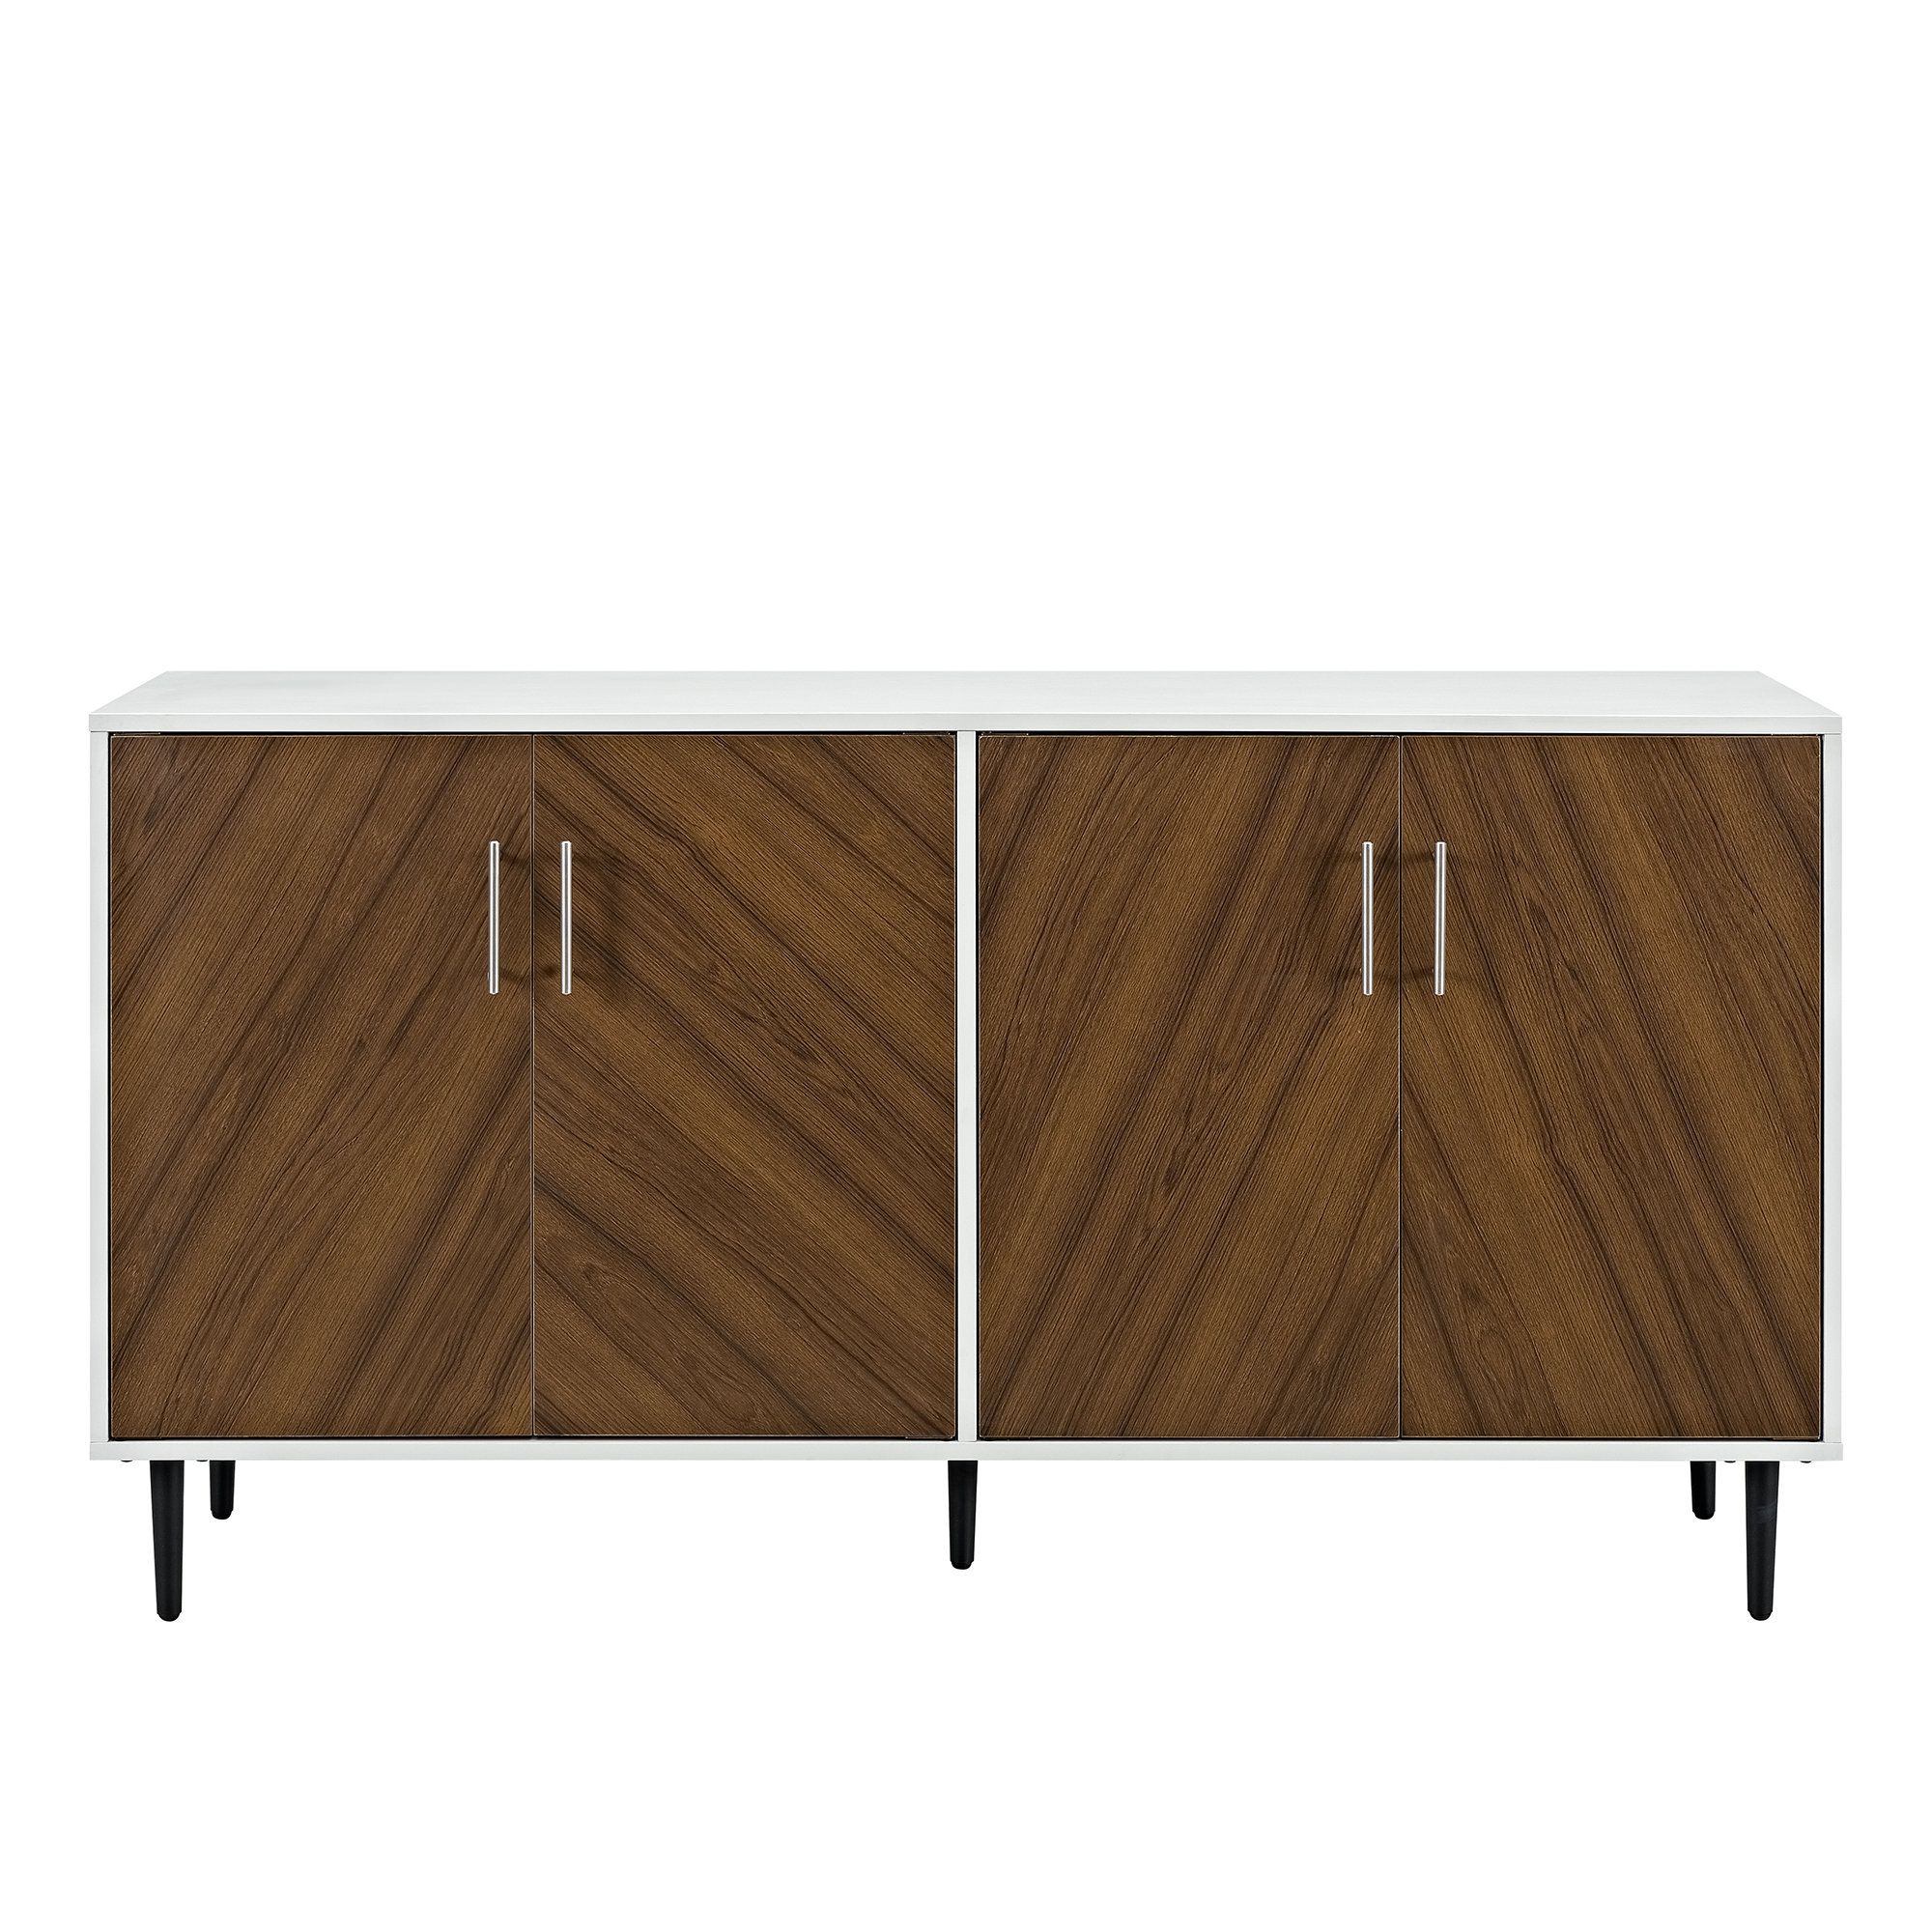 Allmodern Pertaining To Newest Longley Sideboards (View 4 of 20)